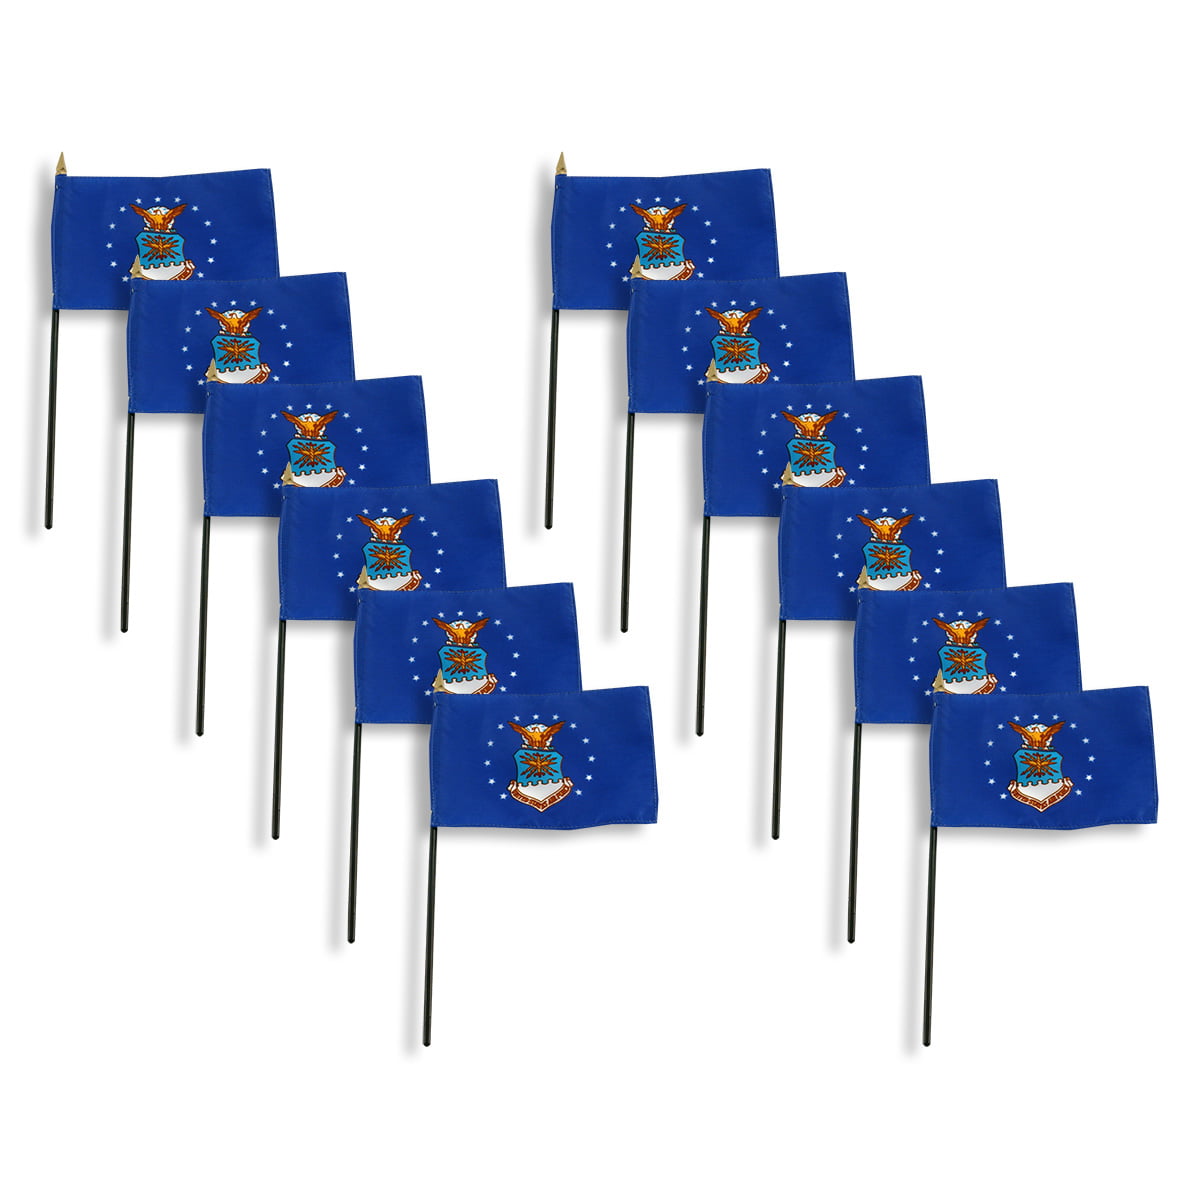 Box of 12 Bavaria 4x6 Miniature Desk & Little Table Flags; 12 Office and Waving Small Mini Bavarian Handheld Stick Flags in a Custom Made Cardboard Box Made for These Flags Made in USA! 